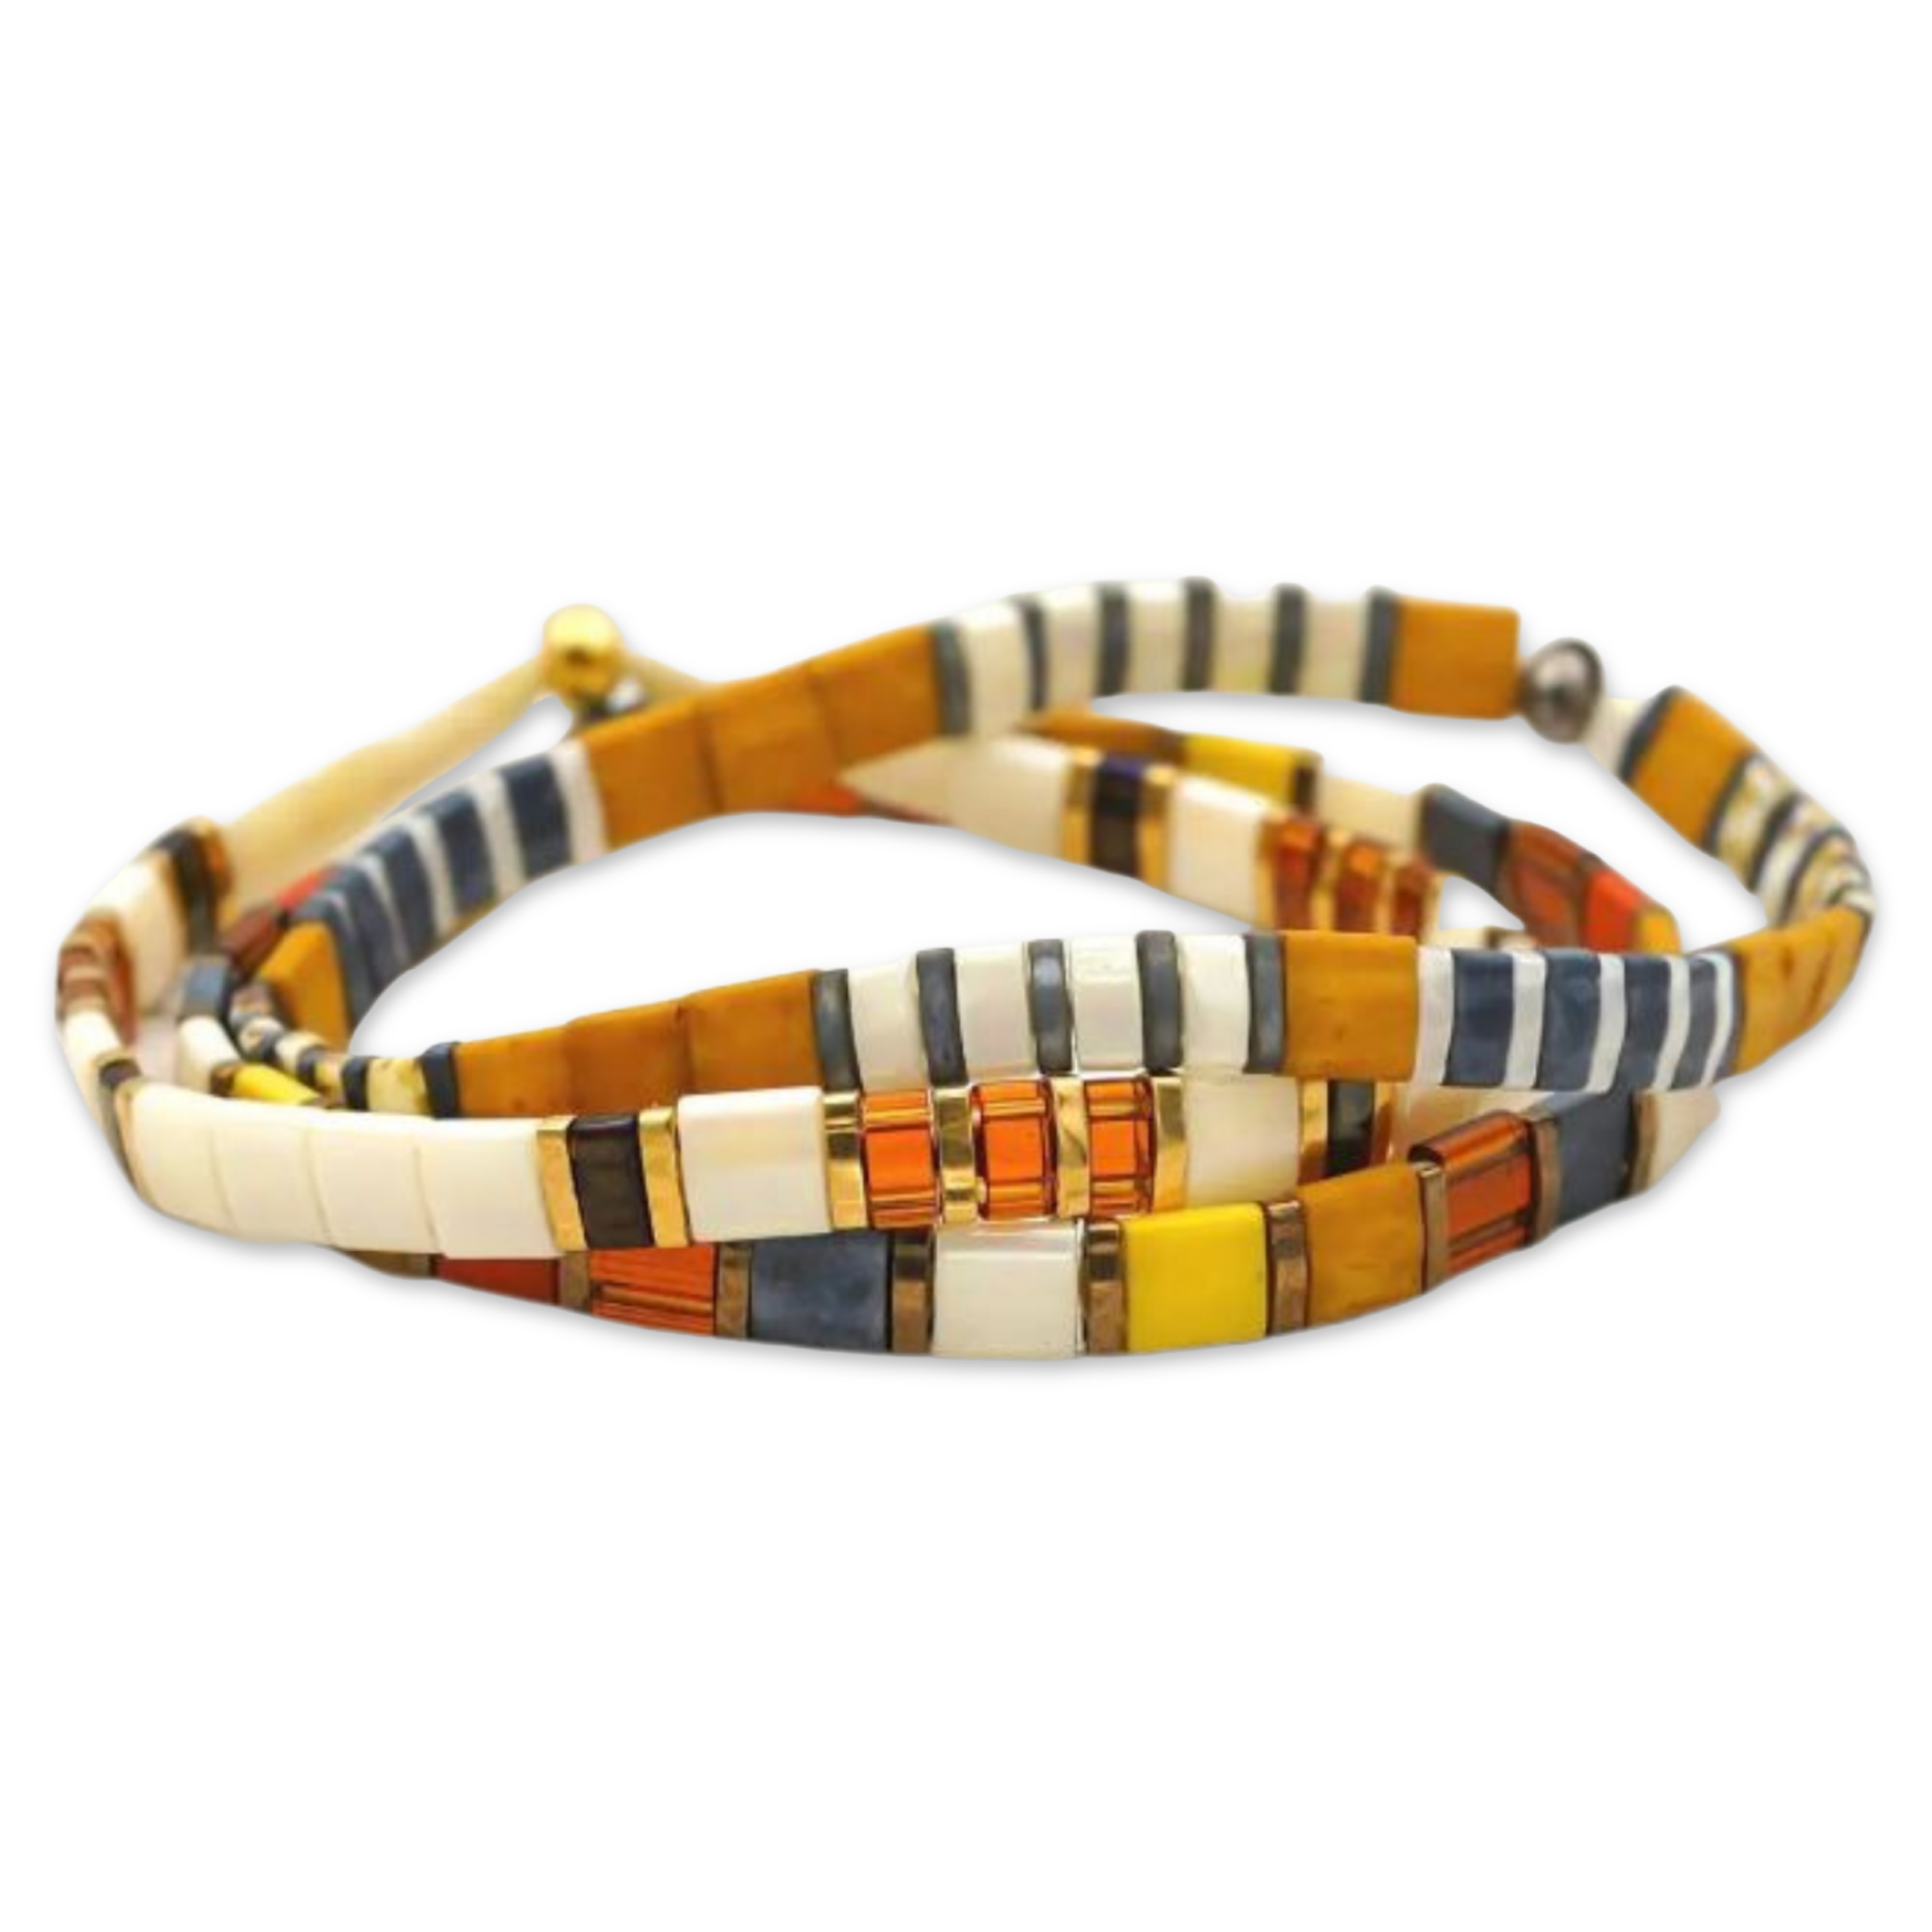 a multicolored bracelet on a white background